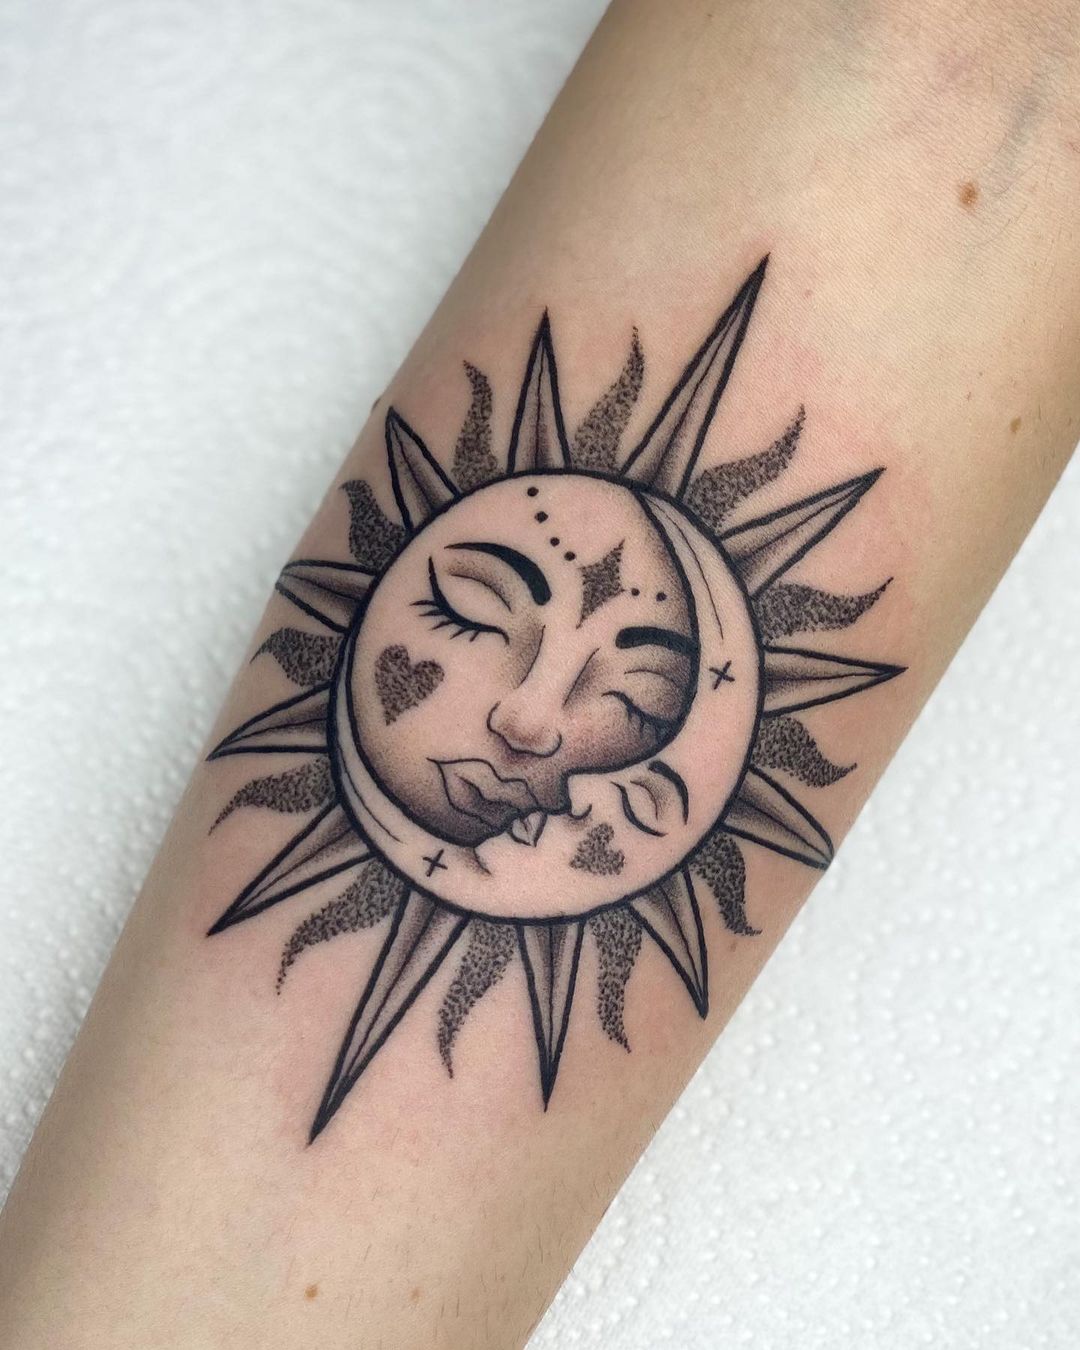 Sun and moon tattoos with faces. (Source: @ lucie.tattoo)